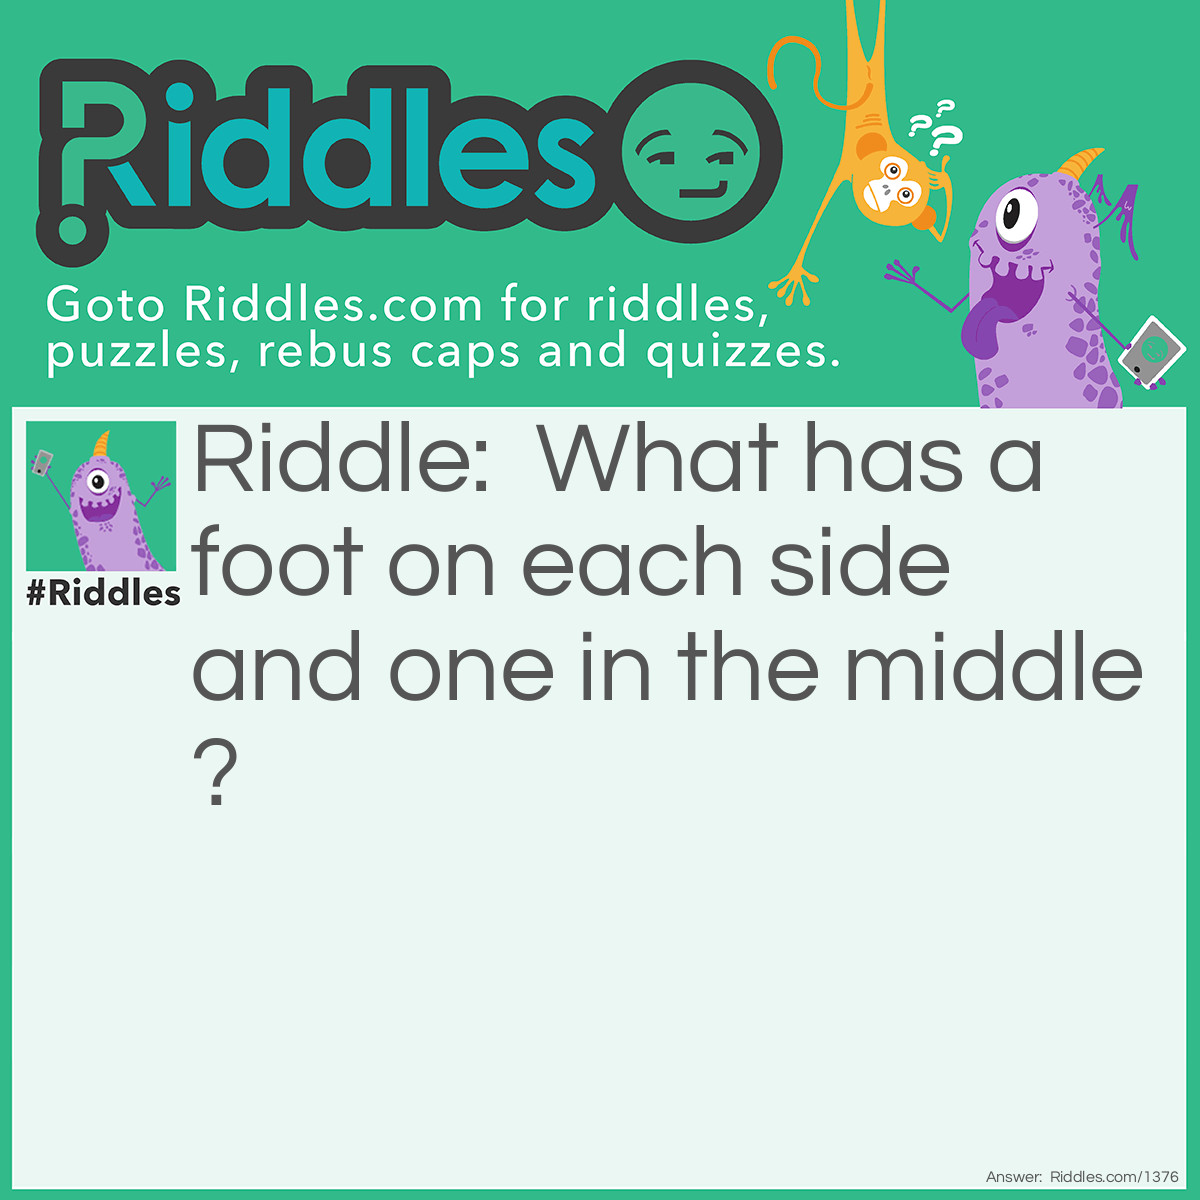 Riddle: What has a foot on each side and one in the middle? Answer: A yardstick.